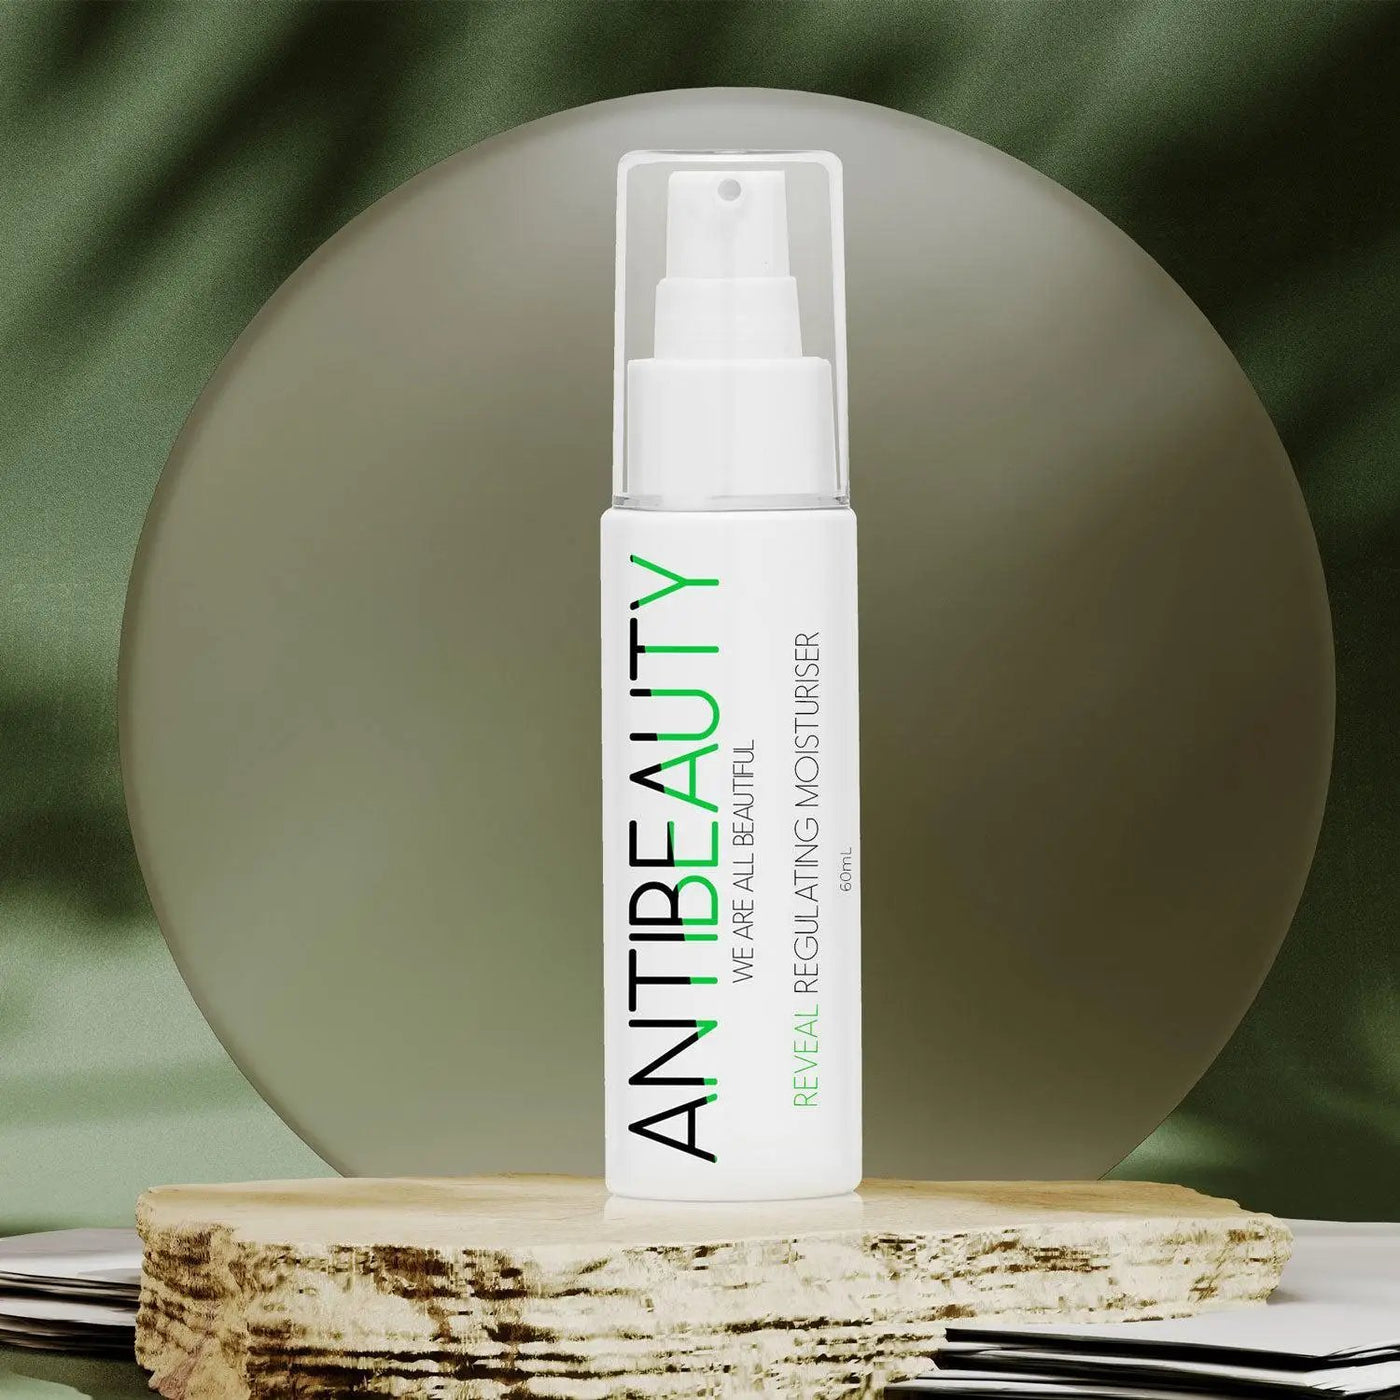 AntiBeauty Reveal Regulating Moisturizer - a gentle and effective solution for oily and acne prone skin - on a stone platform in front of a green background.